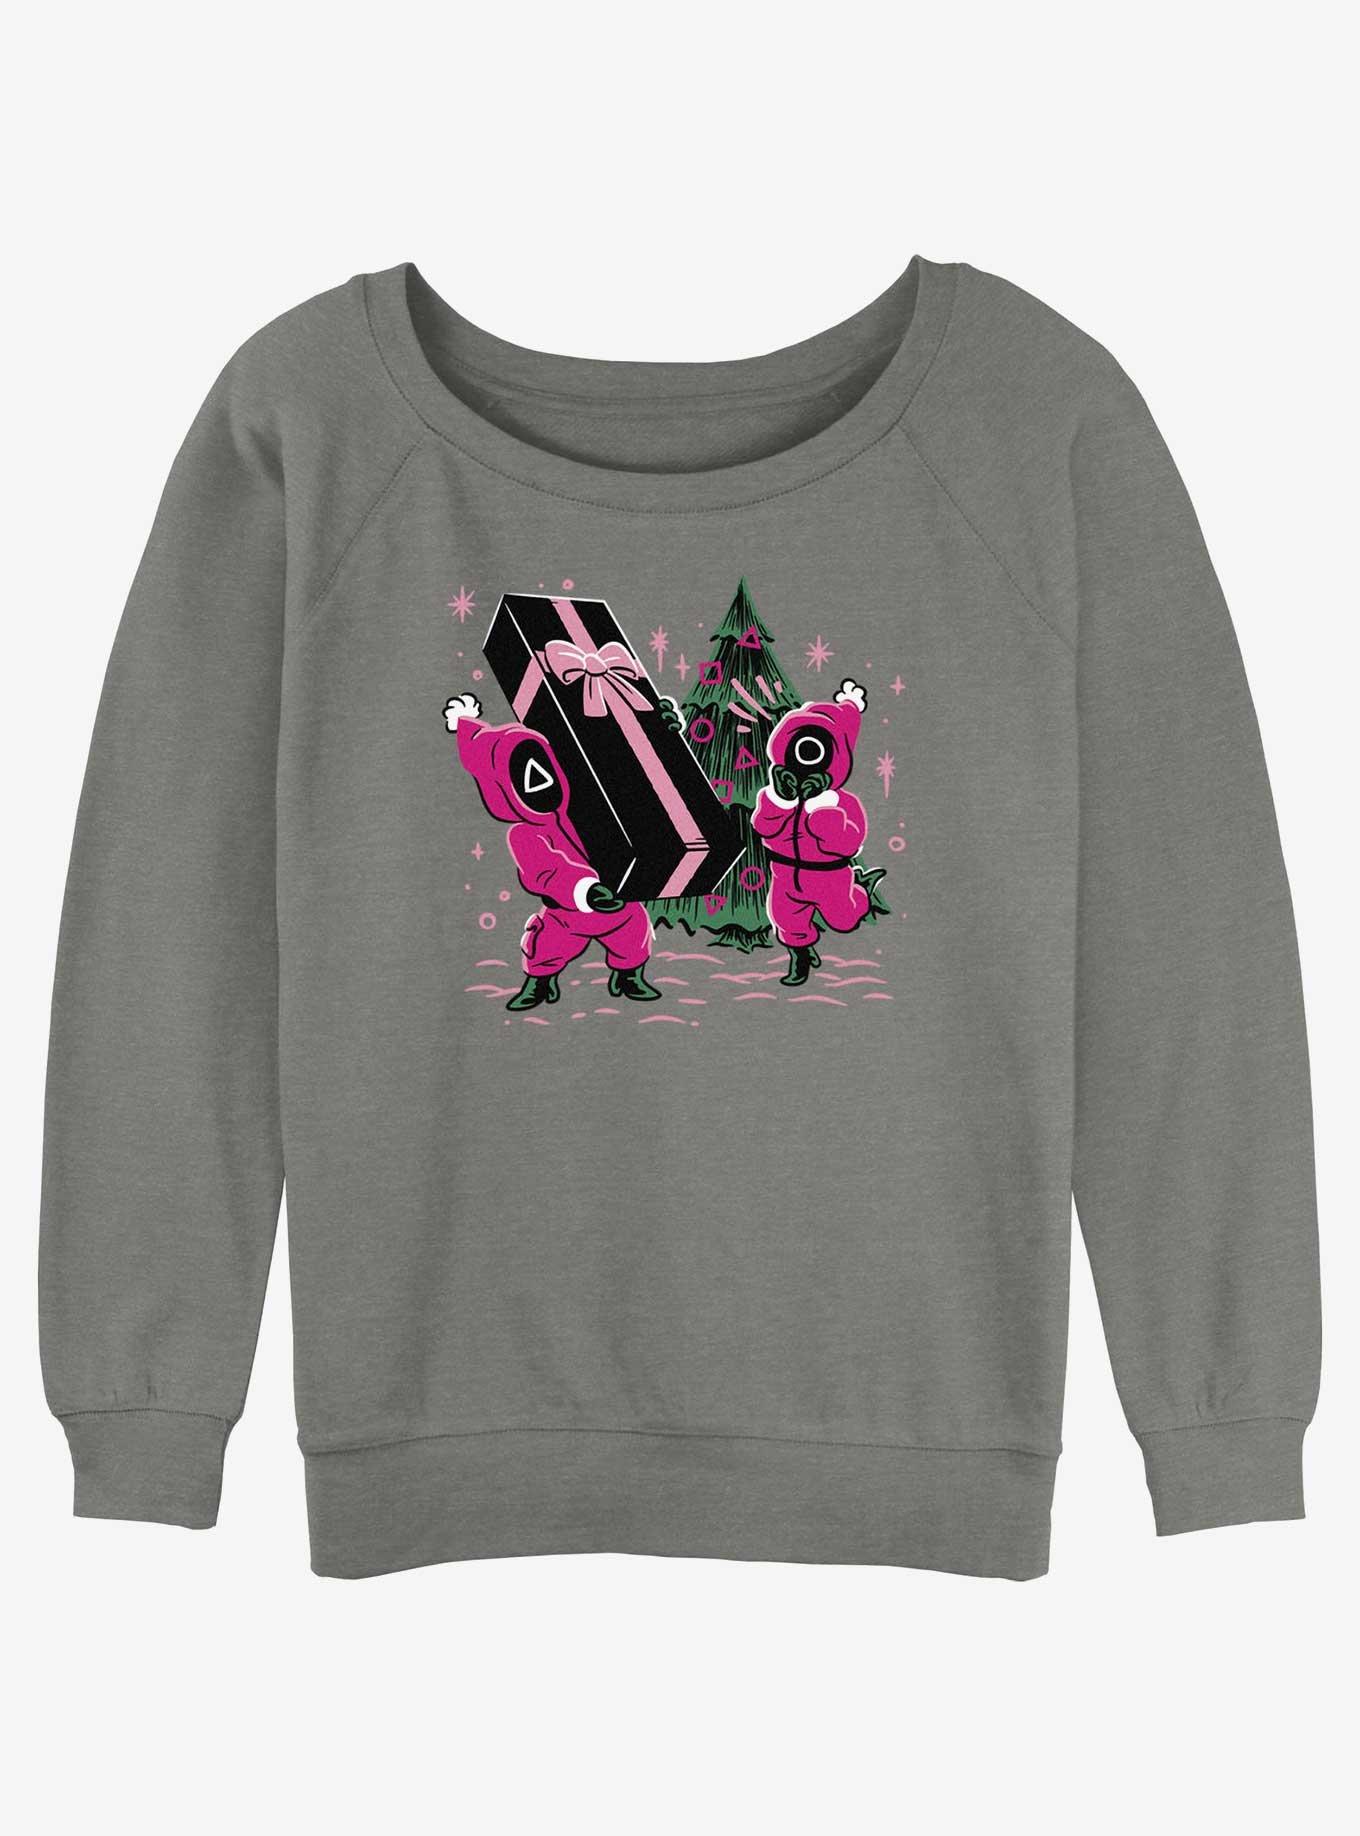 Squid Game Holiday Presents Pink Soldiers Girls Slouchy Sweatshirt, GRAY HTR, hi-res